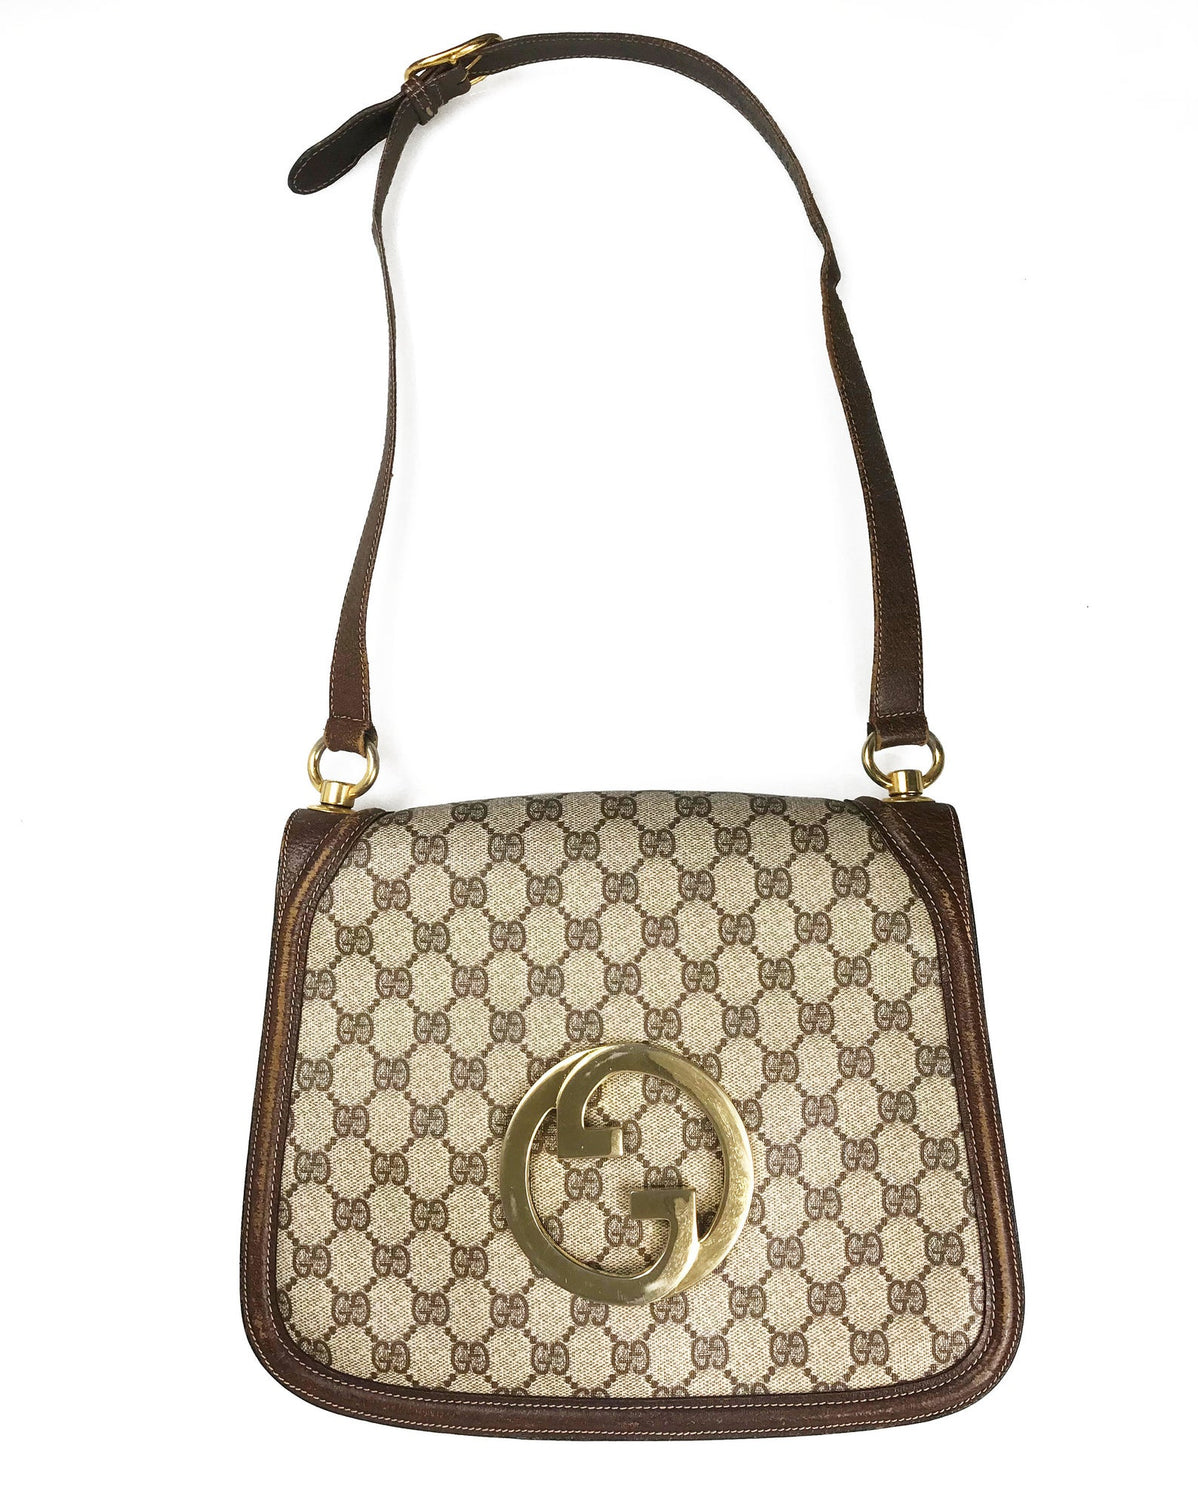 FRUIT Vintage Gucci 1973 Blondie logo monogram canvas shoulder bag features a very large front double G Gucci Logo at the front, a classic flap closure, brown leather trim and internal zipper pocket.